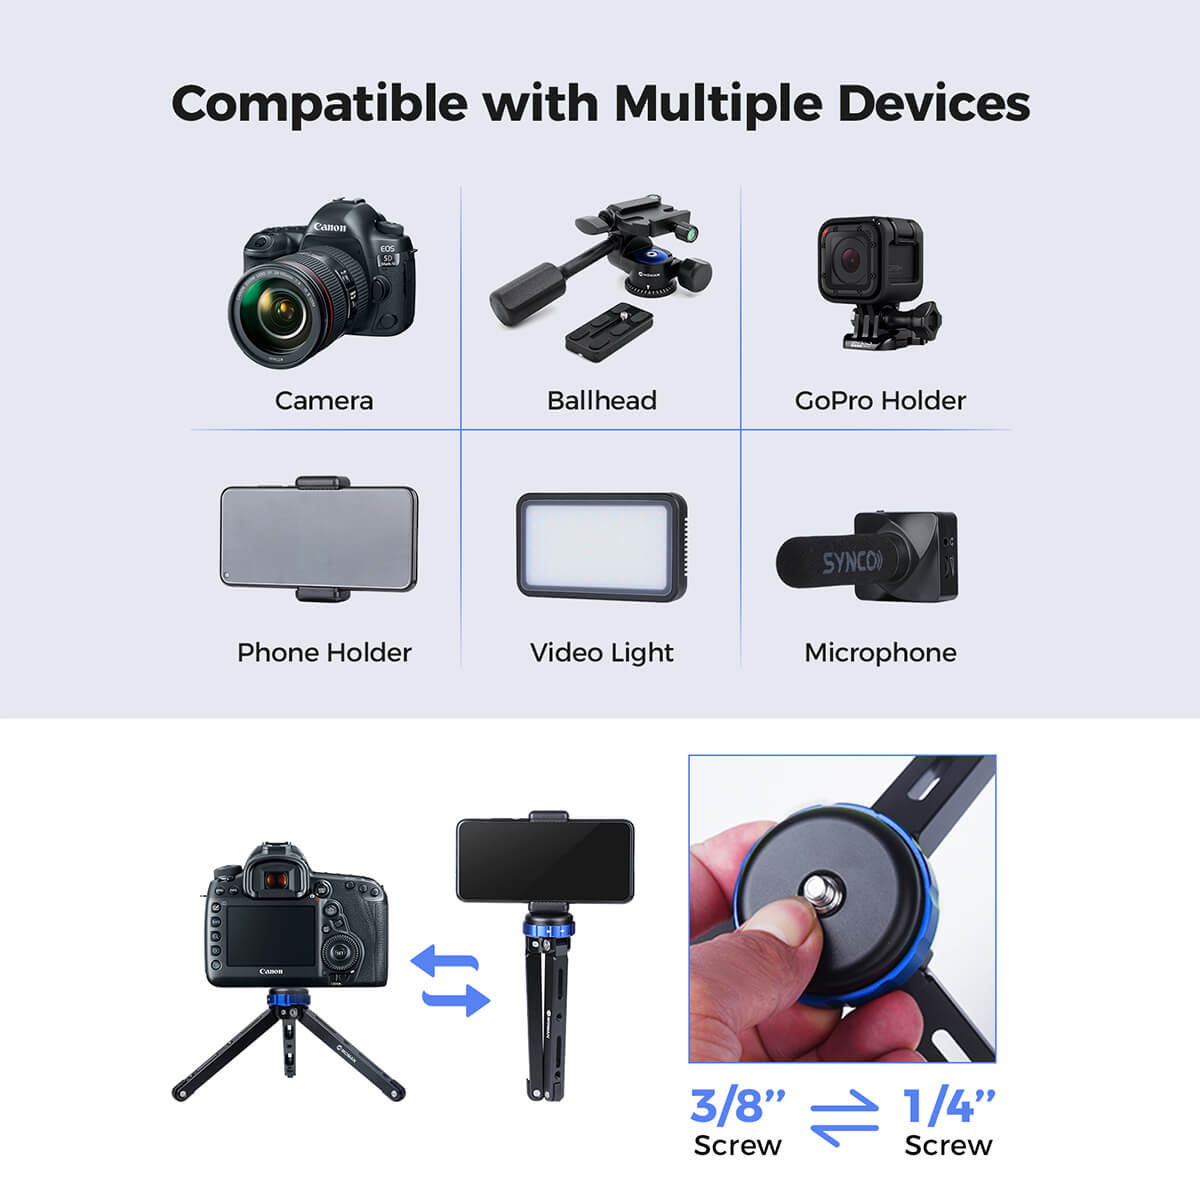 Moman TR01 tripod is compatible with multiple devices, such as cameras, phone holders, video lights, microphones, and so on.